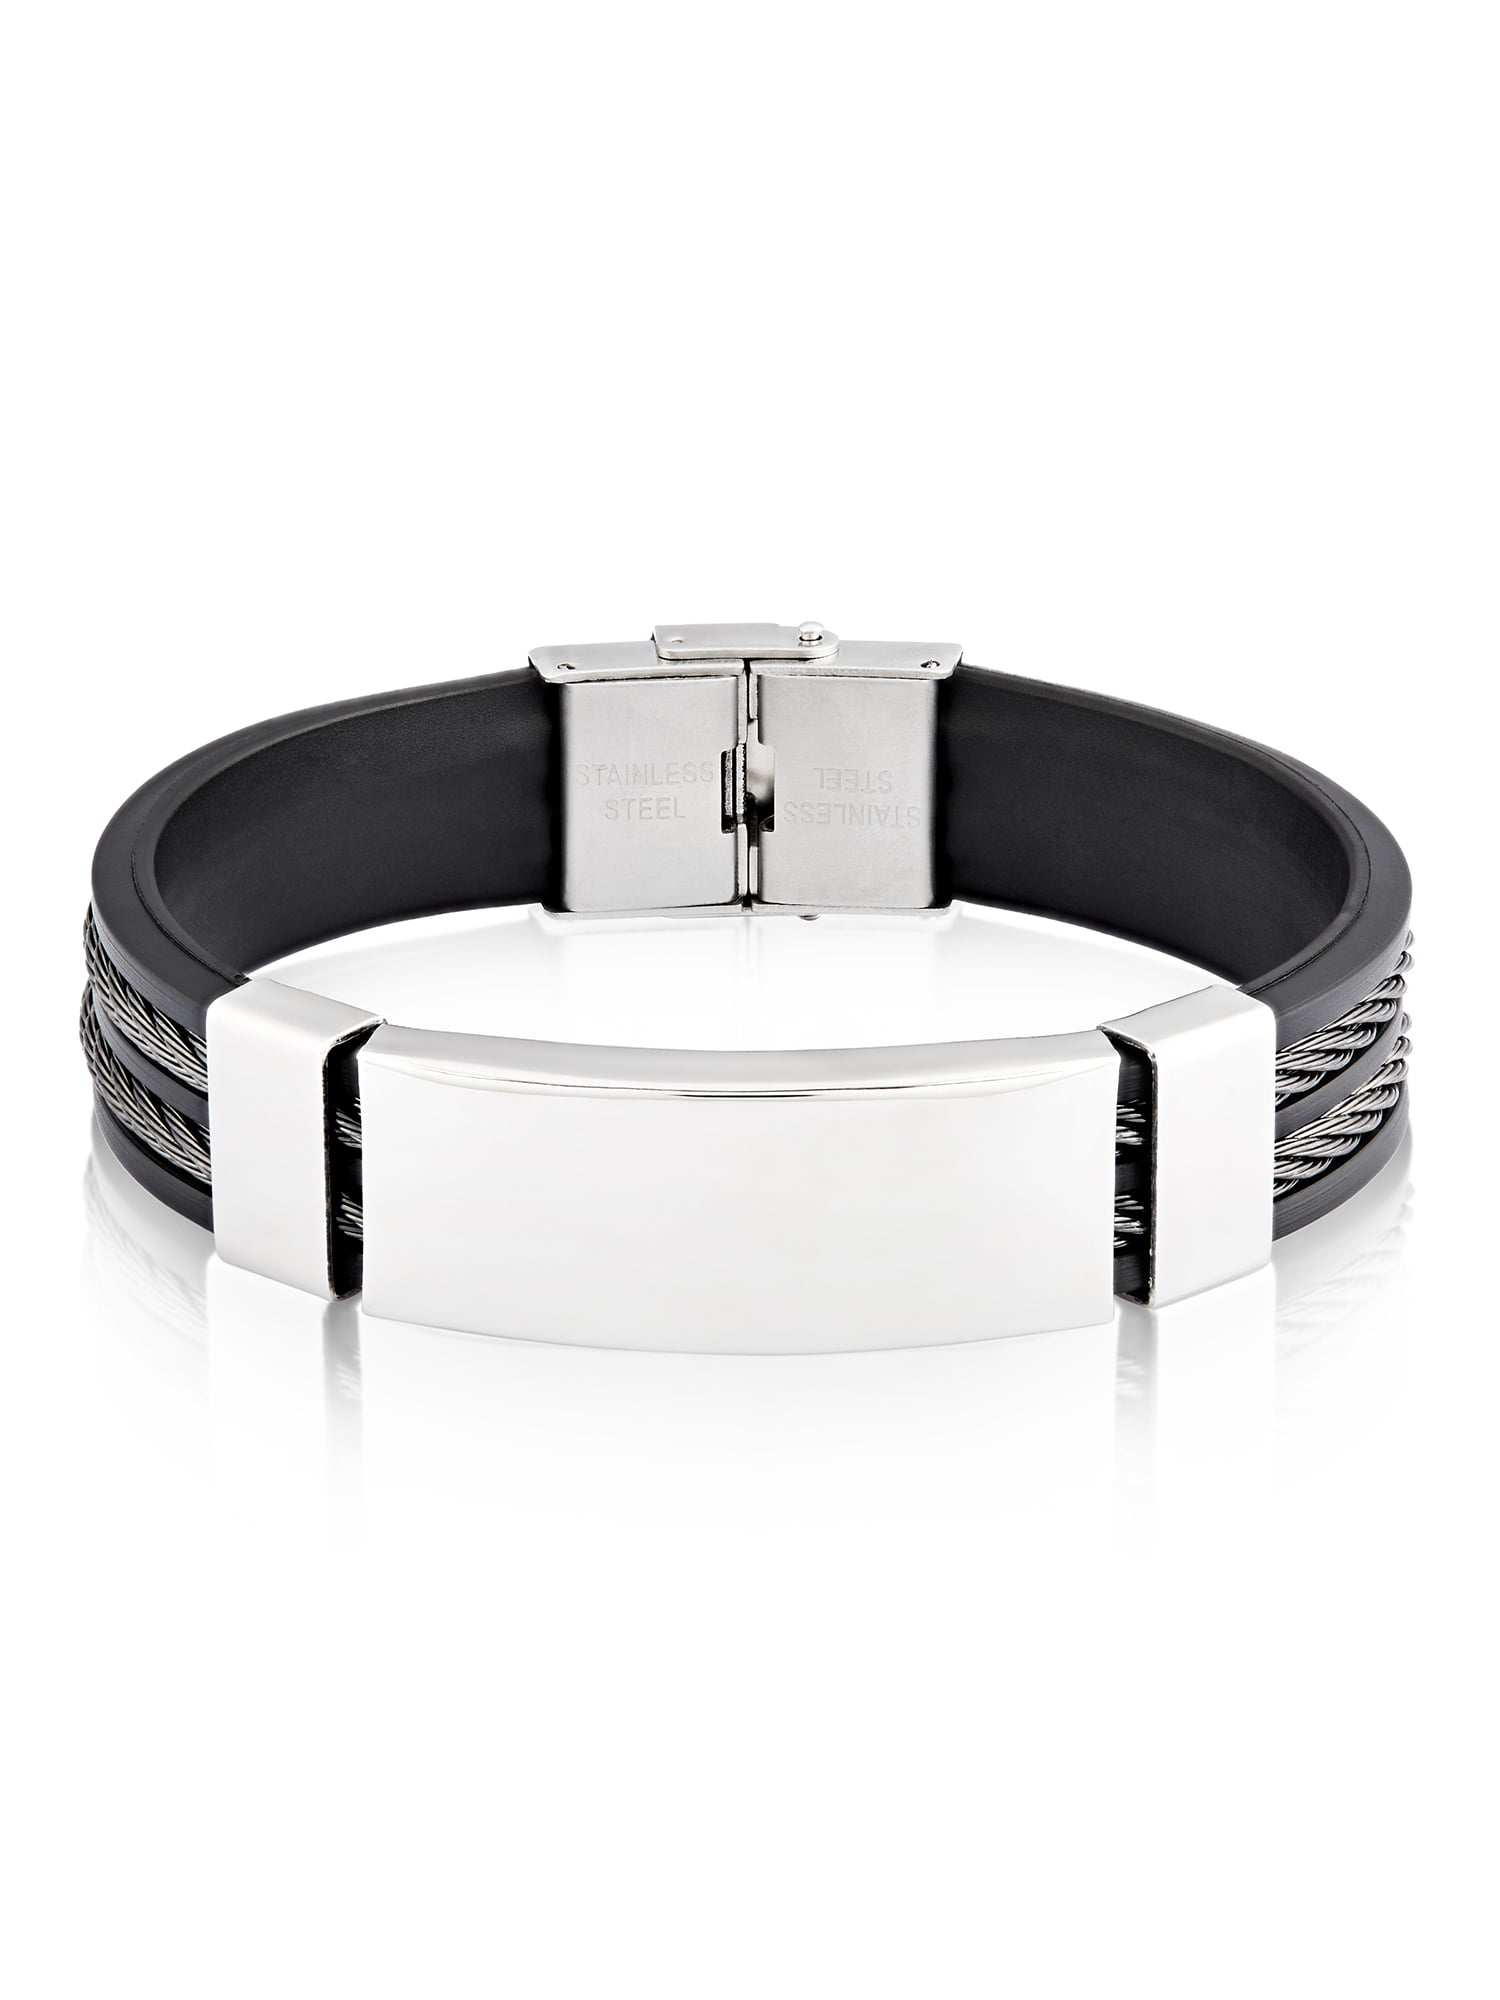 Stainless Steel Black Silicone Bracelet for Men for Boys Inlaid with Steel Cable